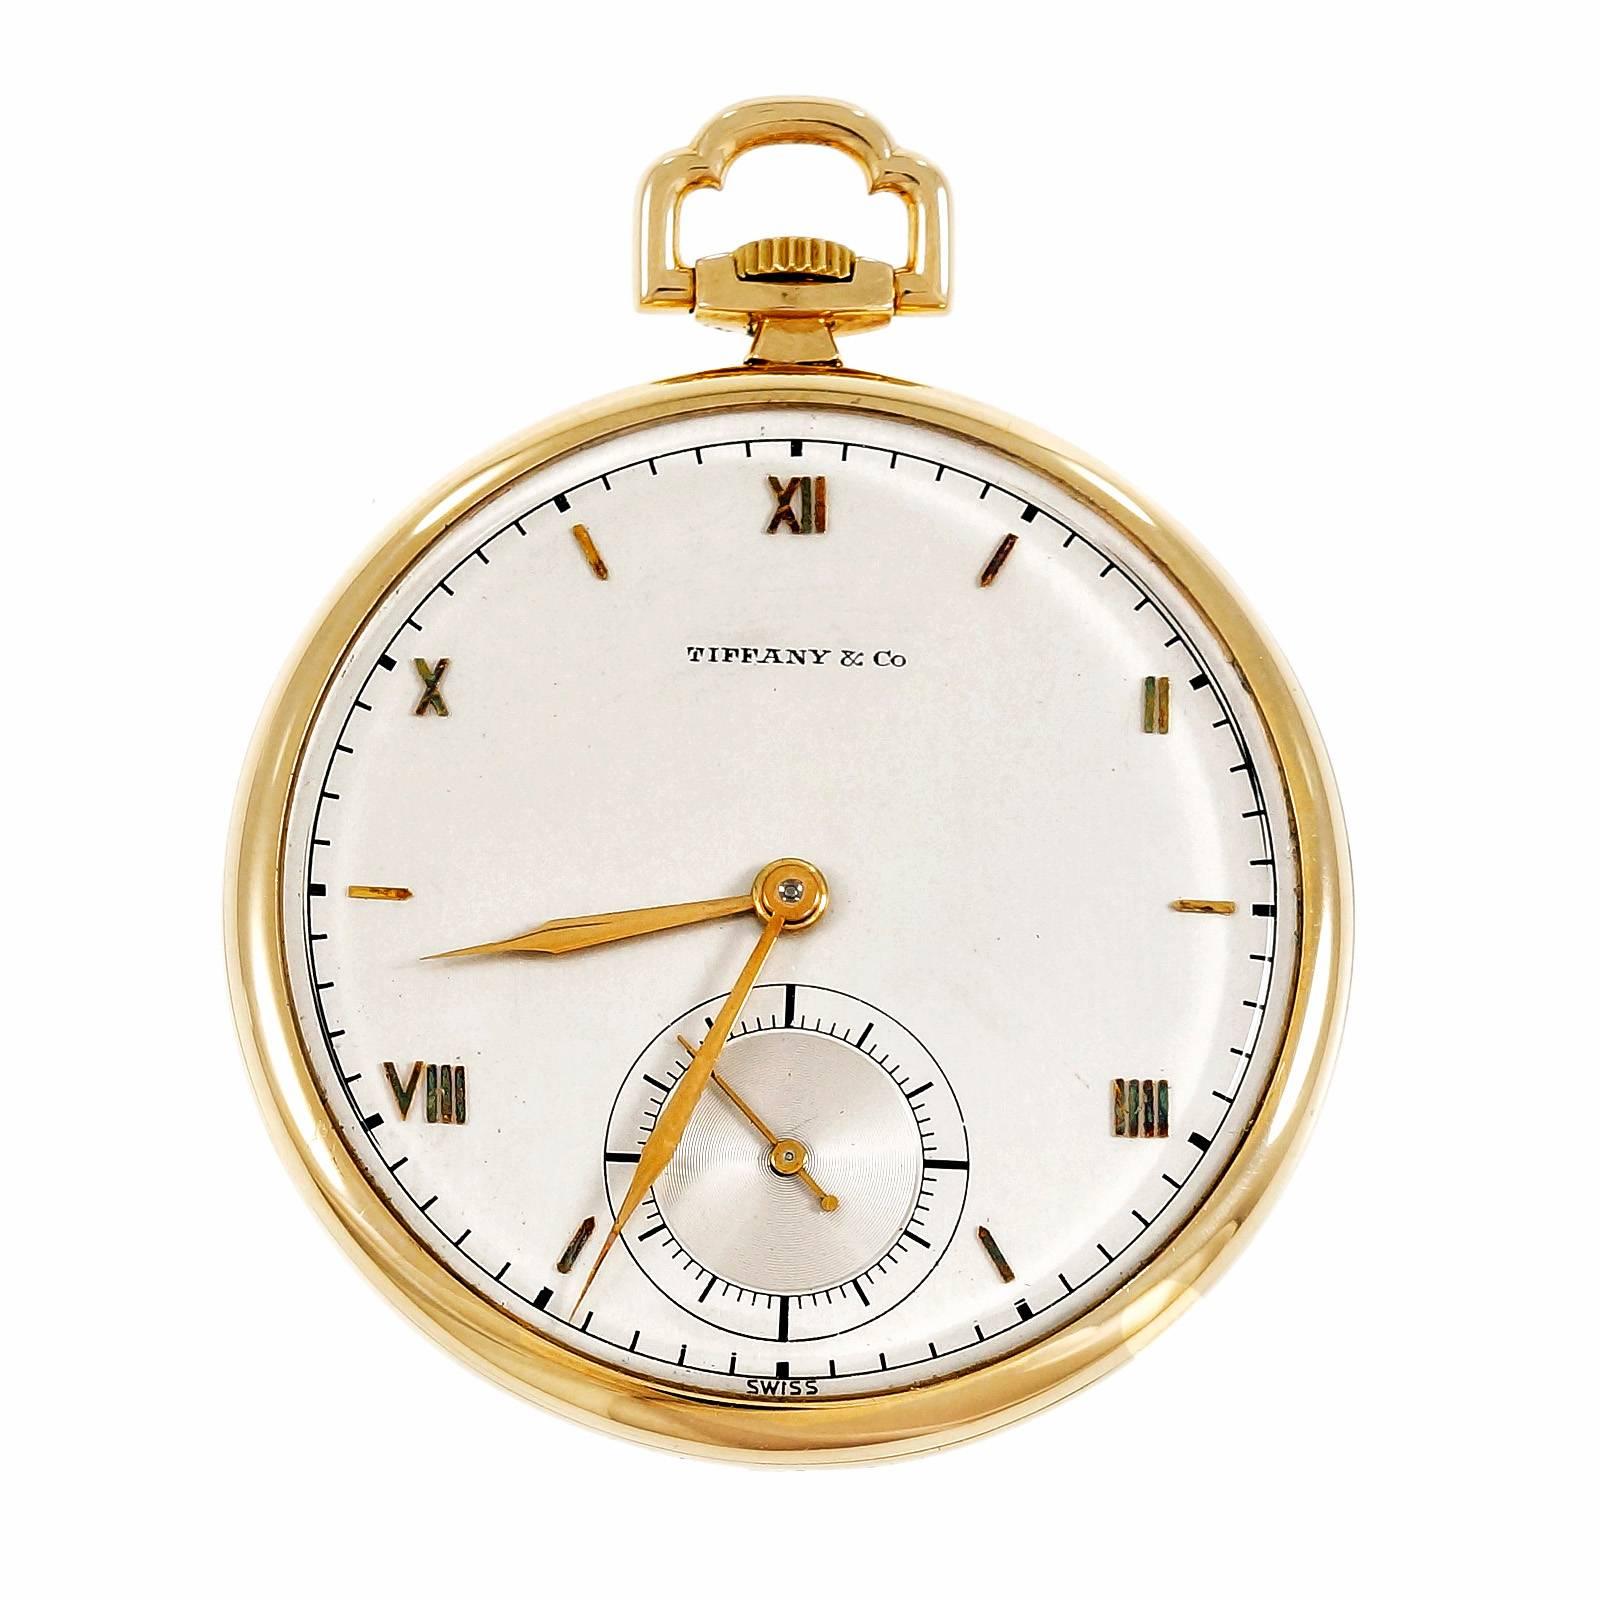 Tiffany & Co. Manual Wind yellow gold Open Face Pocket Watch